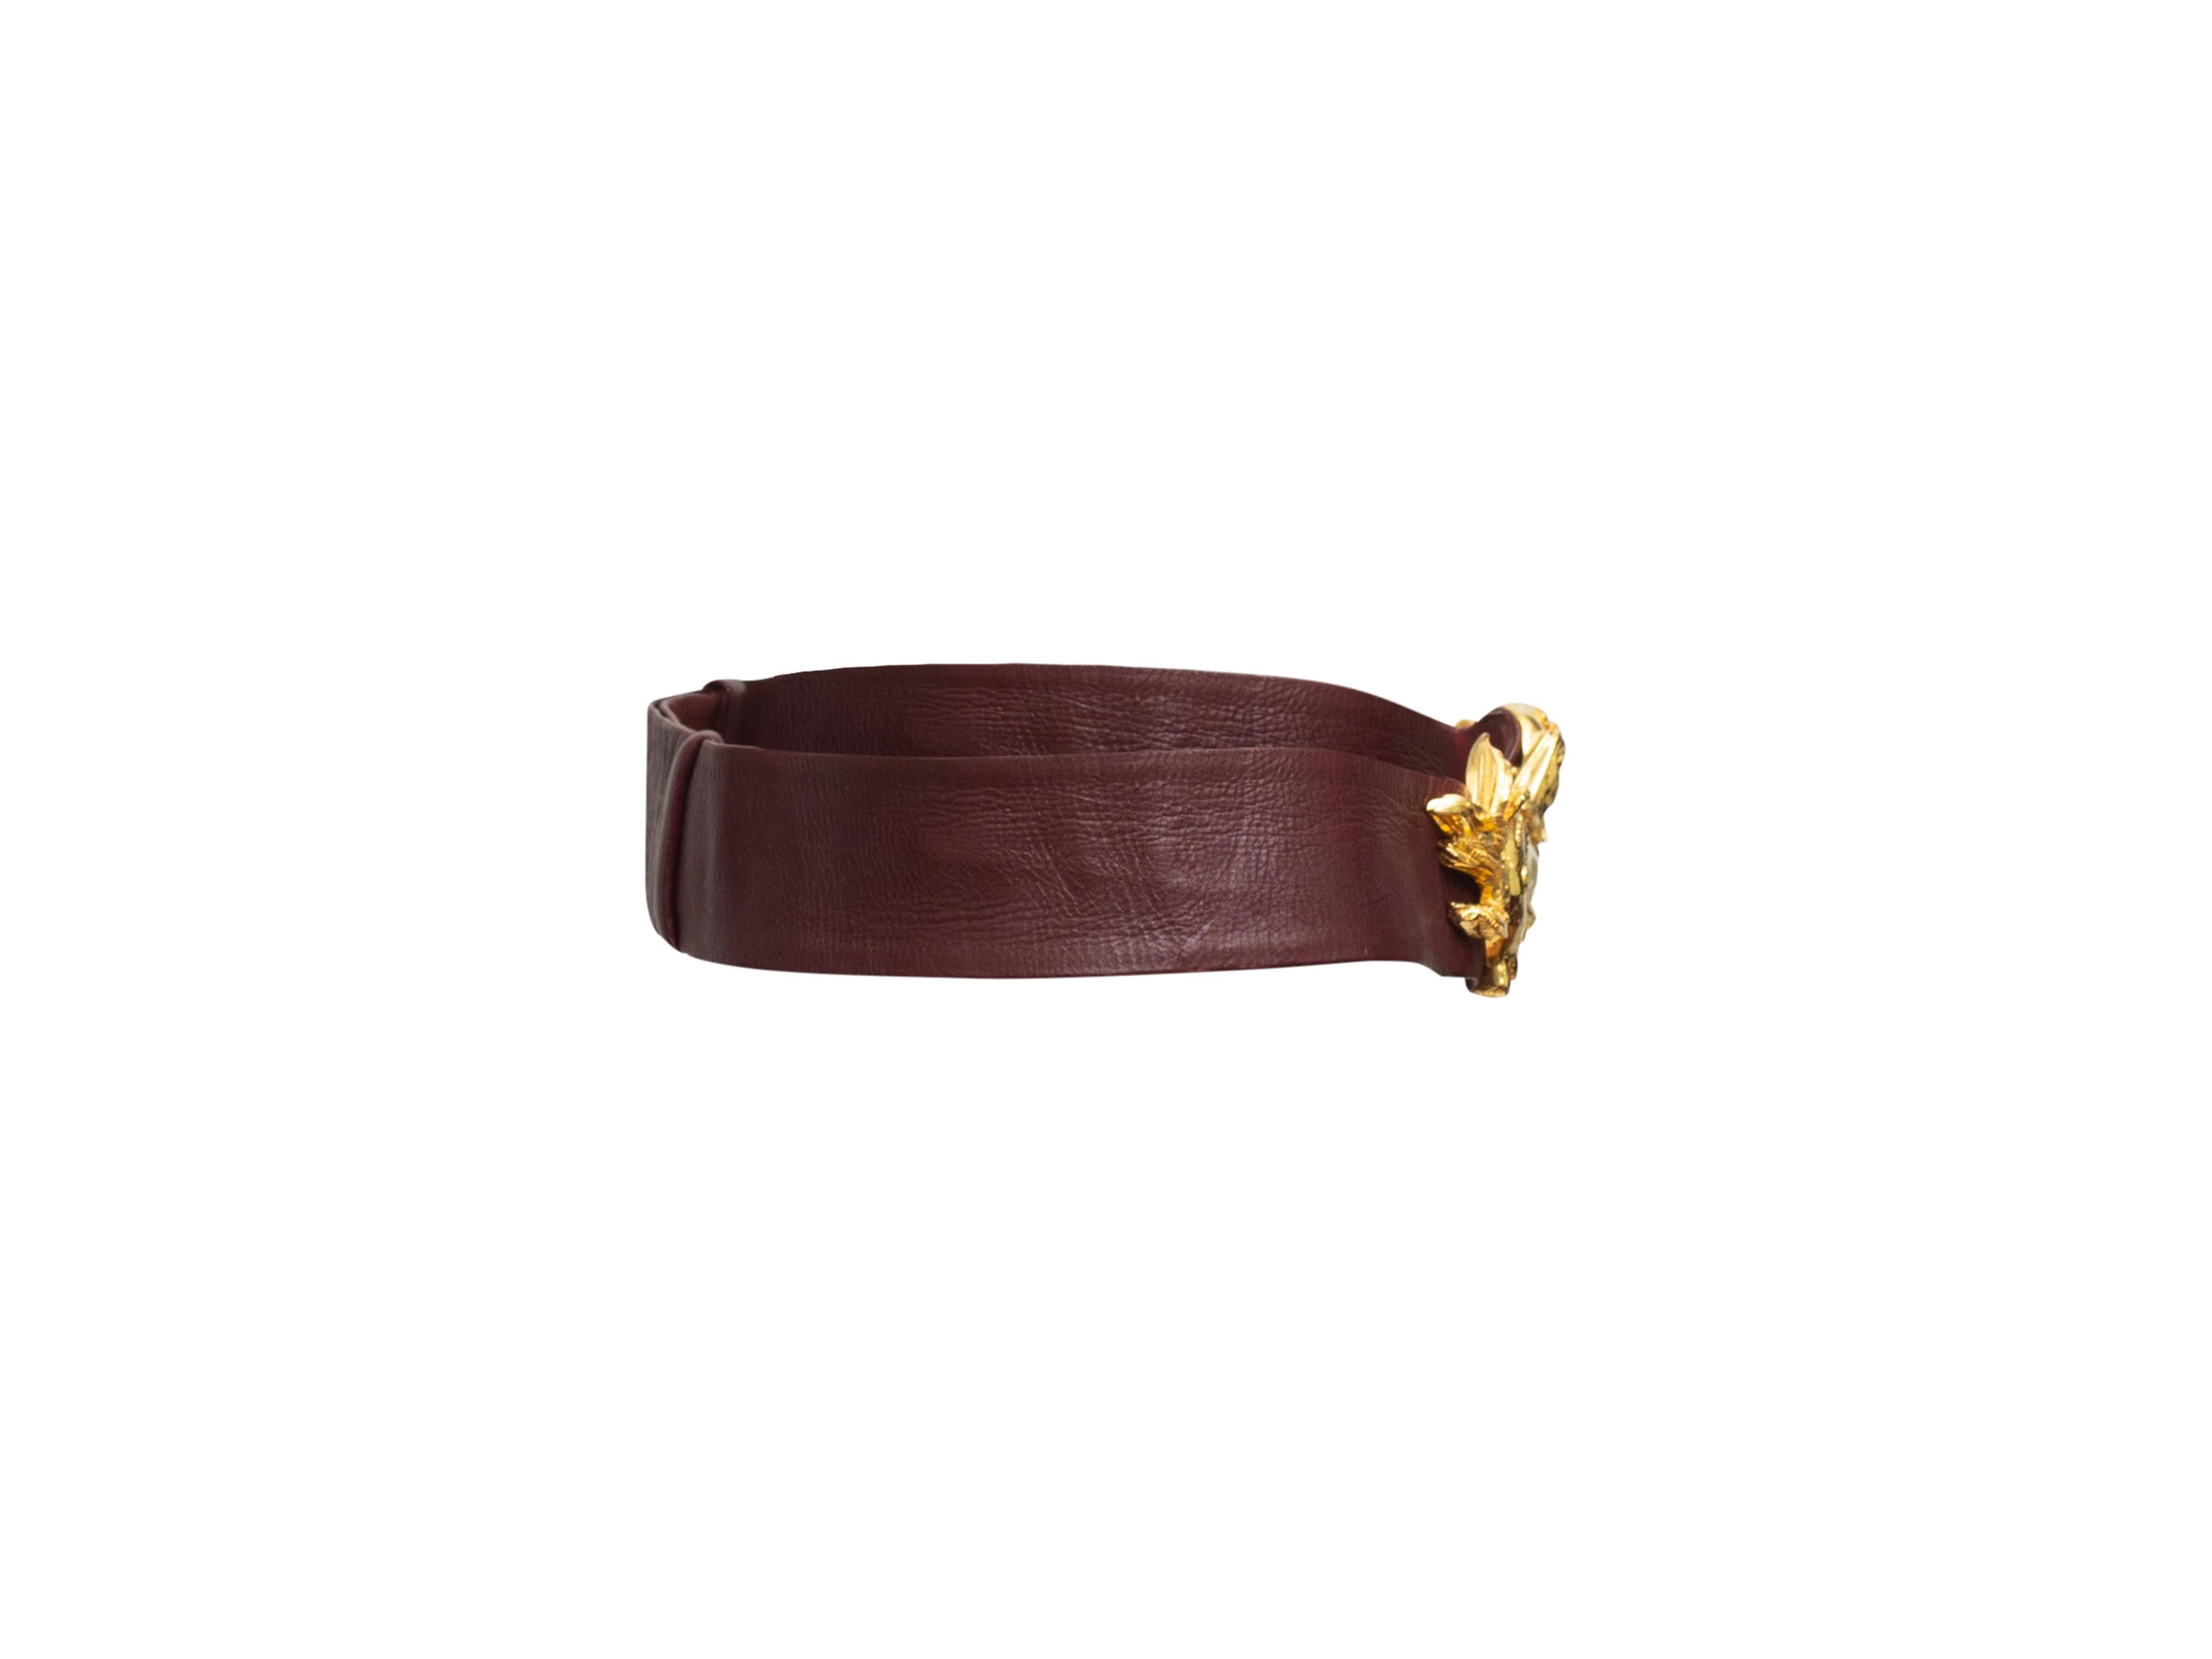 Product details: Burgundy leather waist belt by Judith Leiber. Ornate gold-tone dragon motif buckle closure. 32